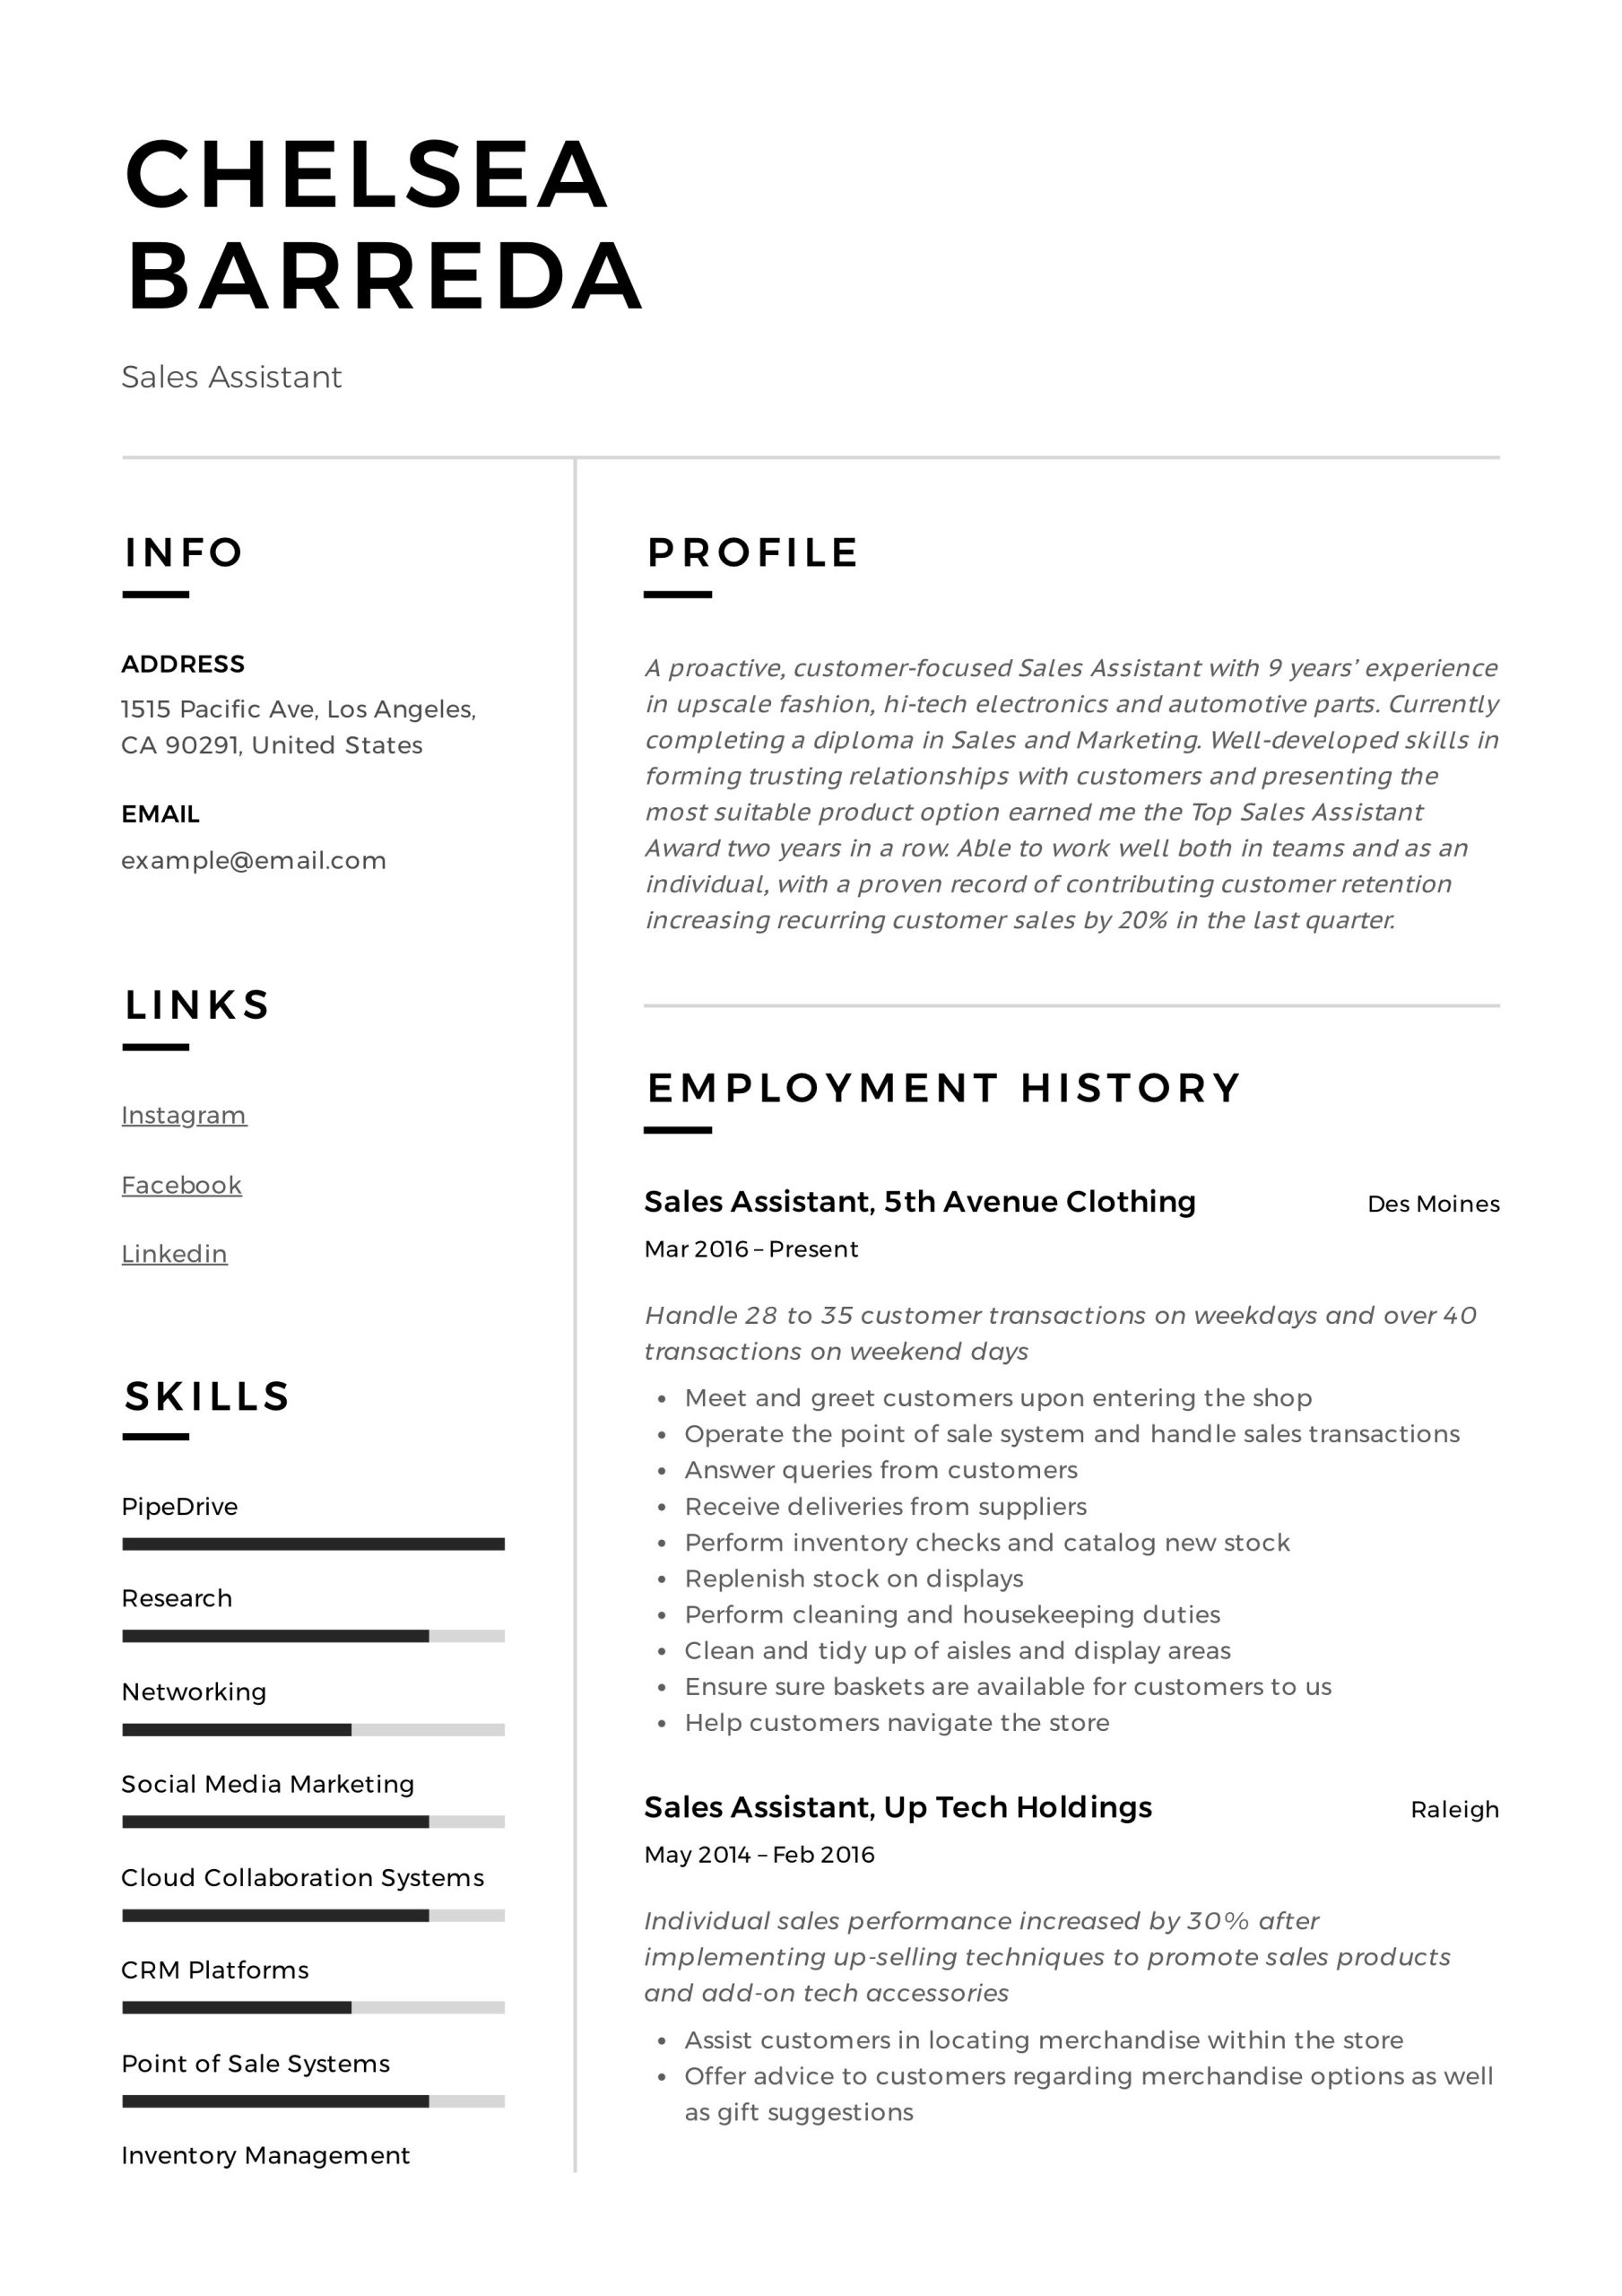 Sample Resume Sales assistant No Experience Sales assistant Resume & Writing Guide – Resumeviking.com